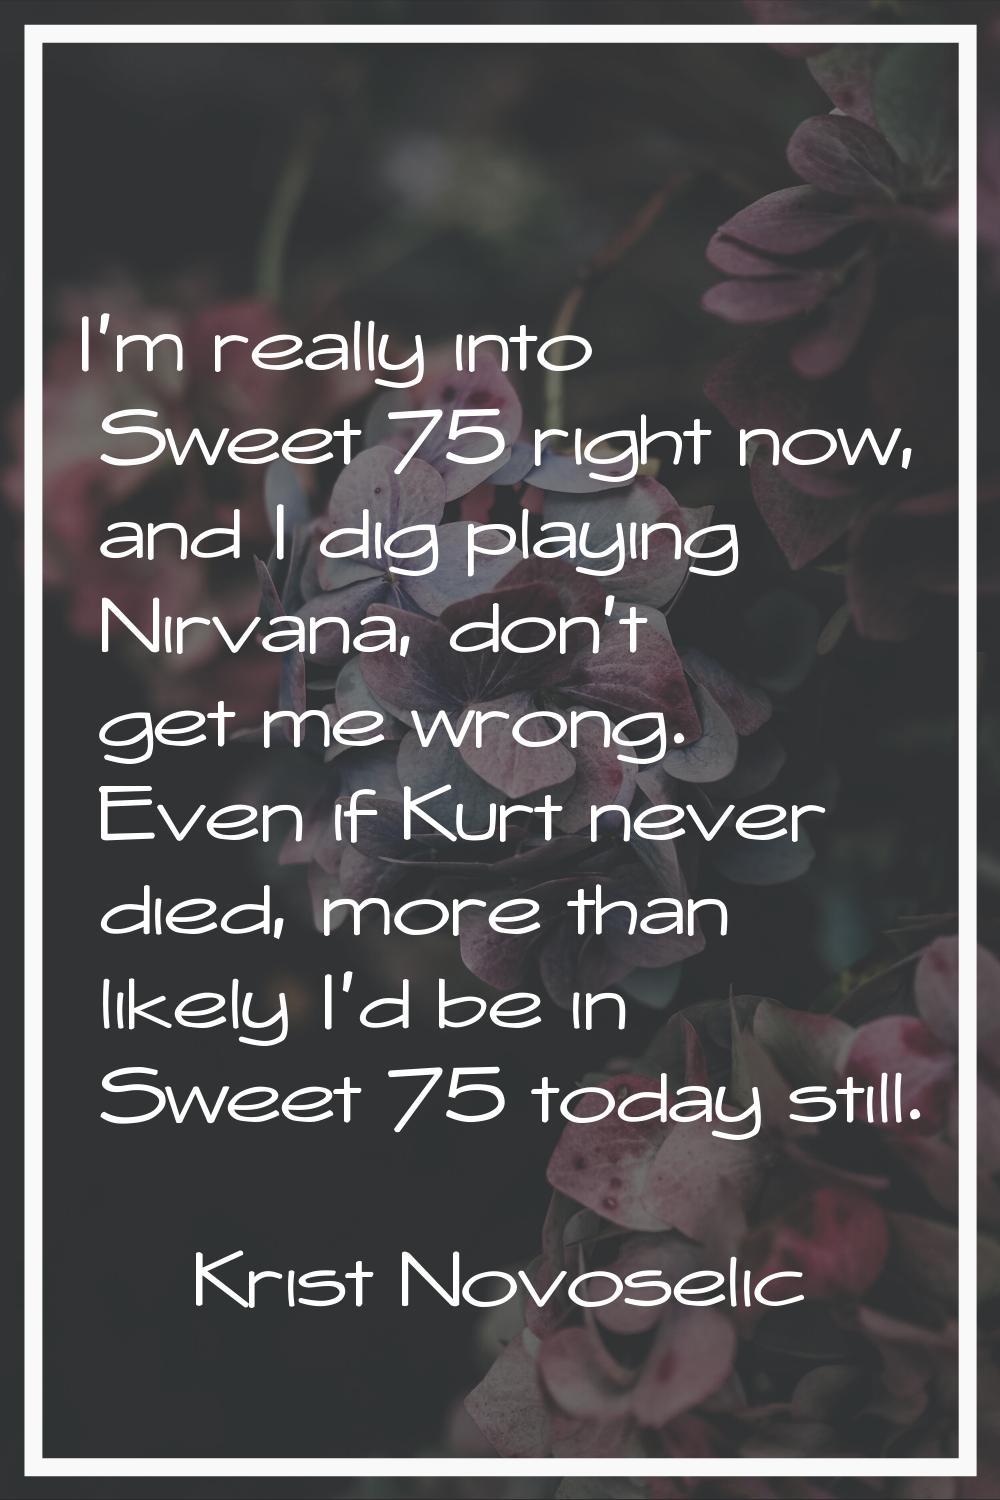 I'm really into Sweet 75 right now, and I dig playing Nirvana, don't get me wrong. Even if Kurt nev